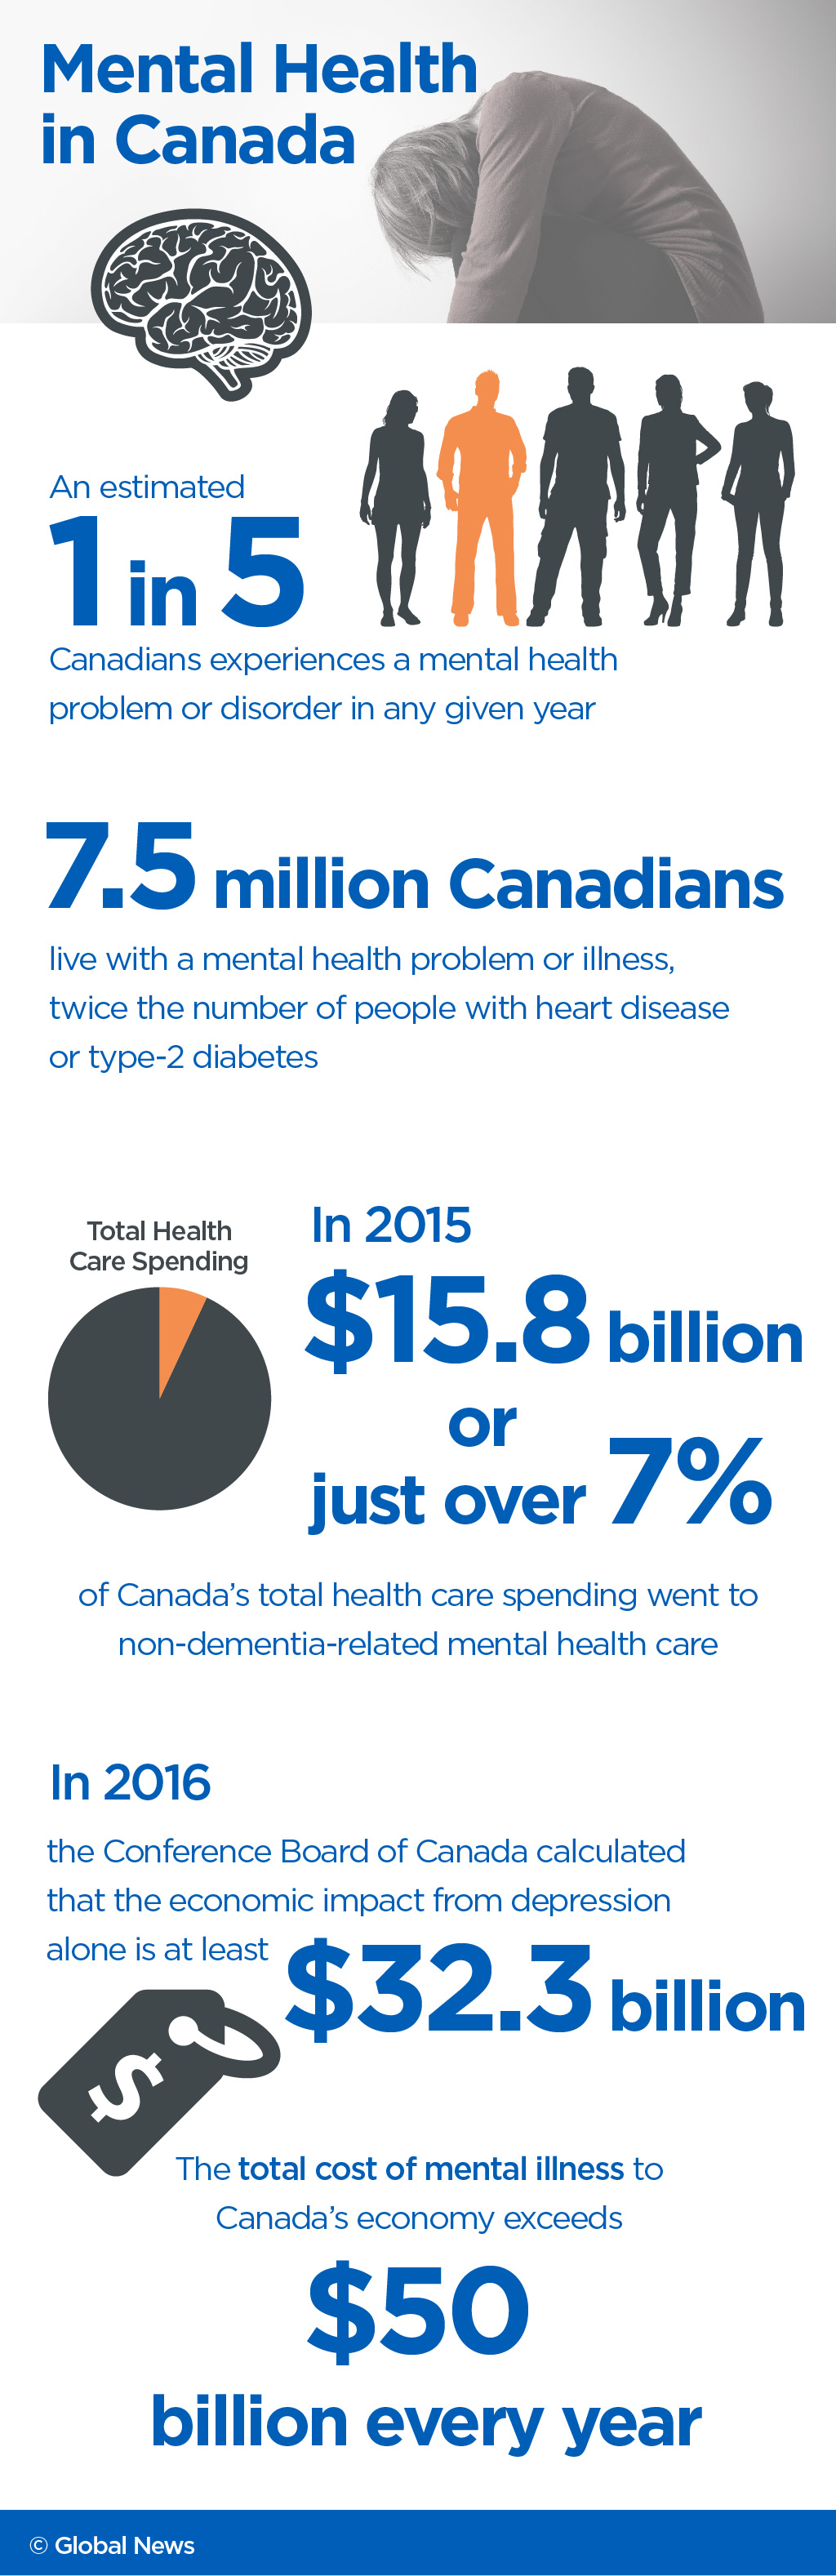 There are stark disparities in access to mental health services across